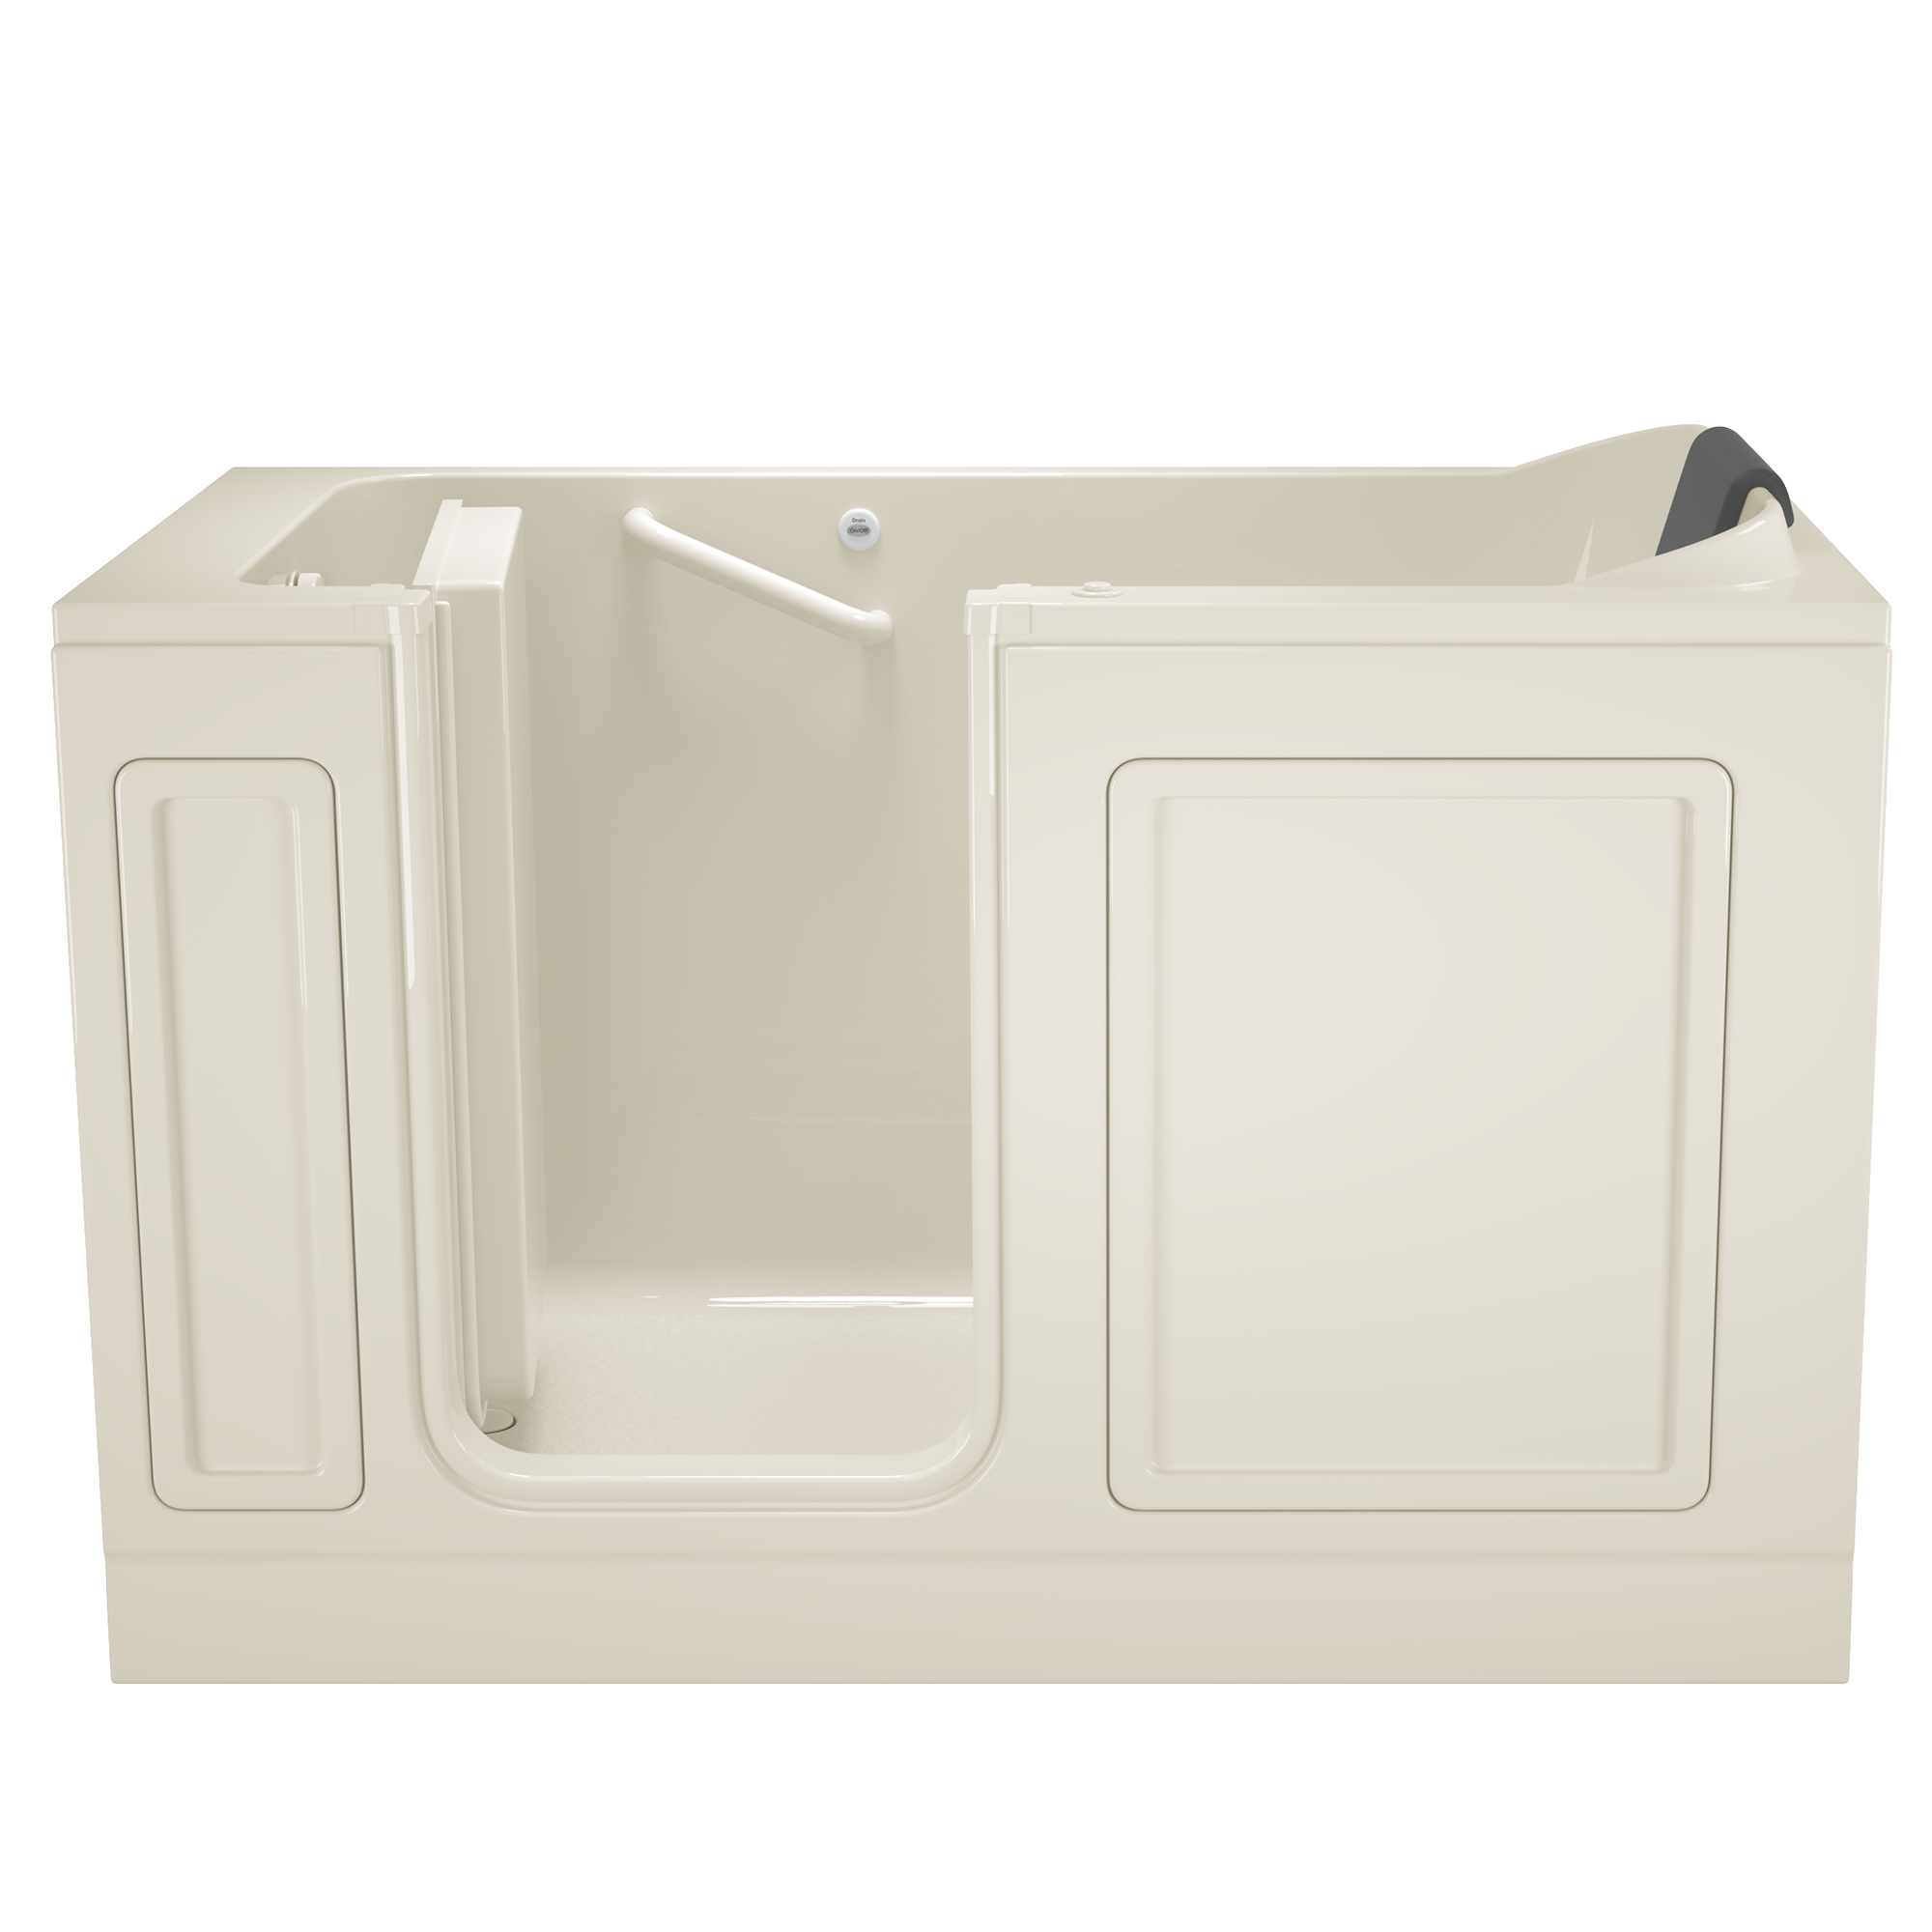 Acrylic Luxury Series 32 x 60 -Inch Walk-in Tub With Air Spa System - Left-Hand Drain